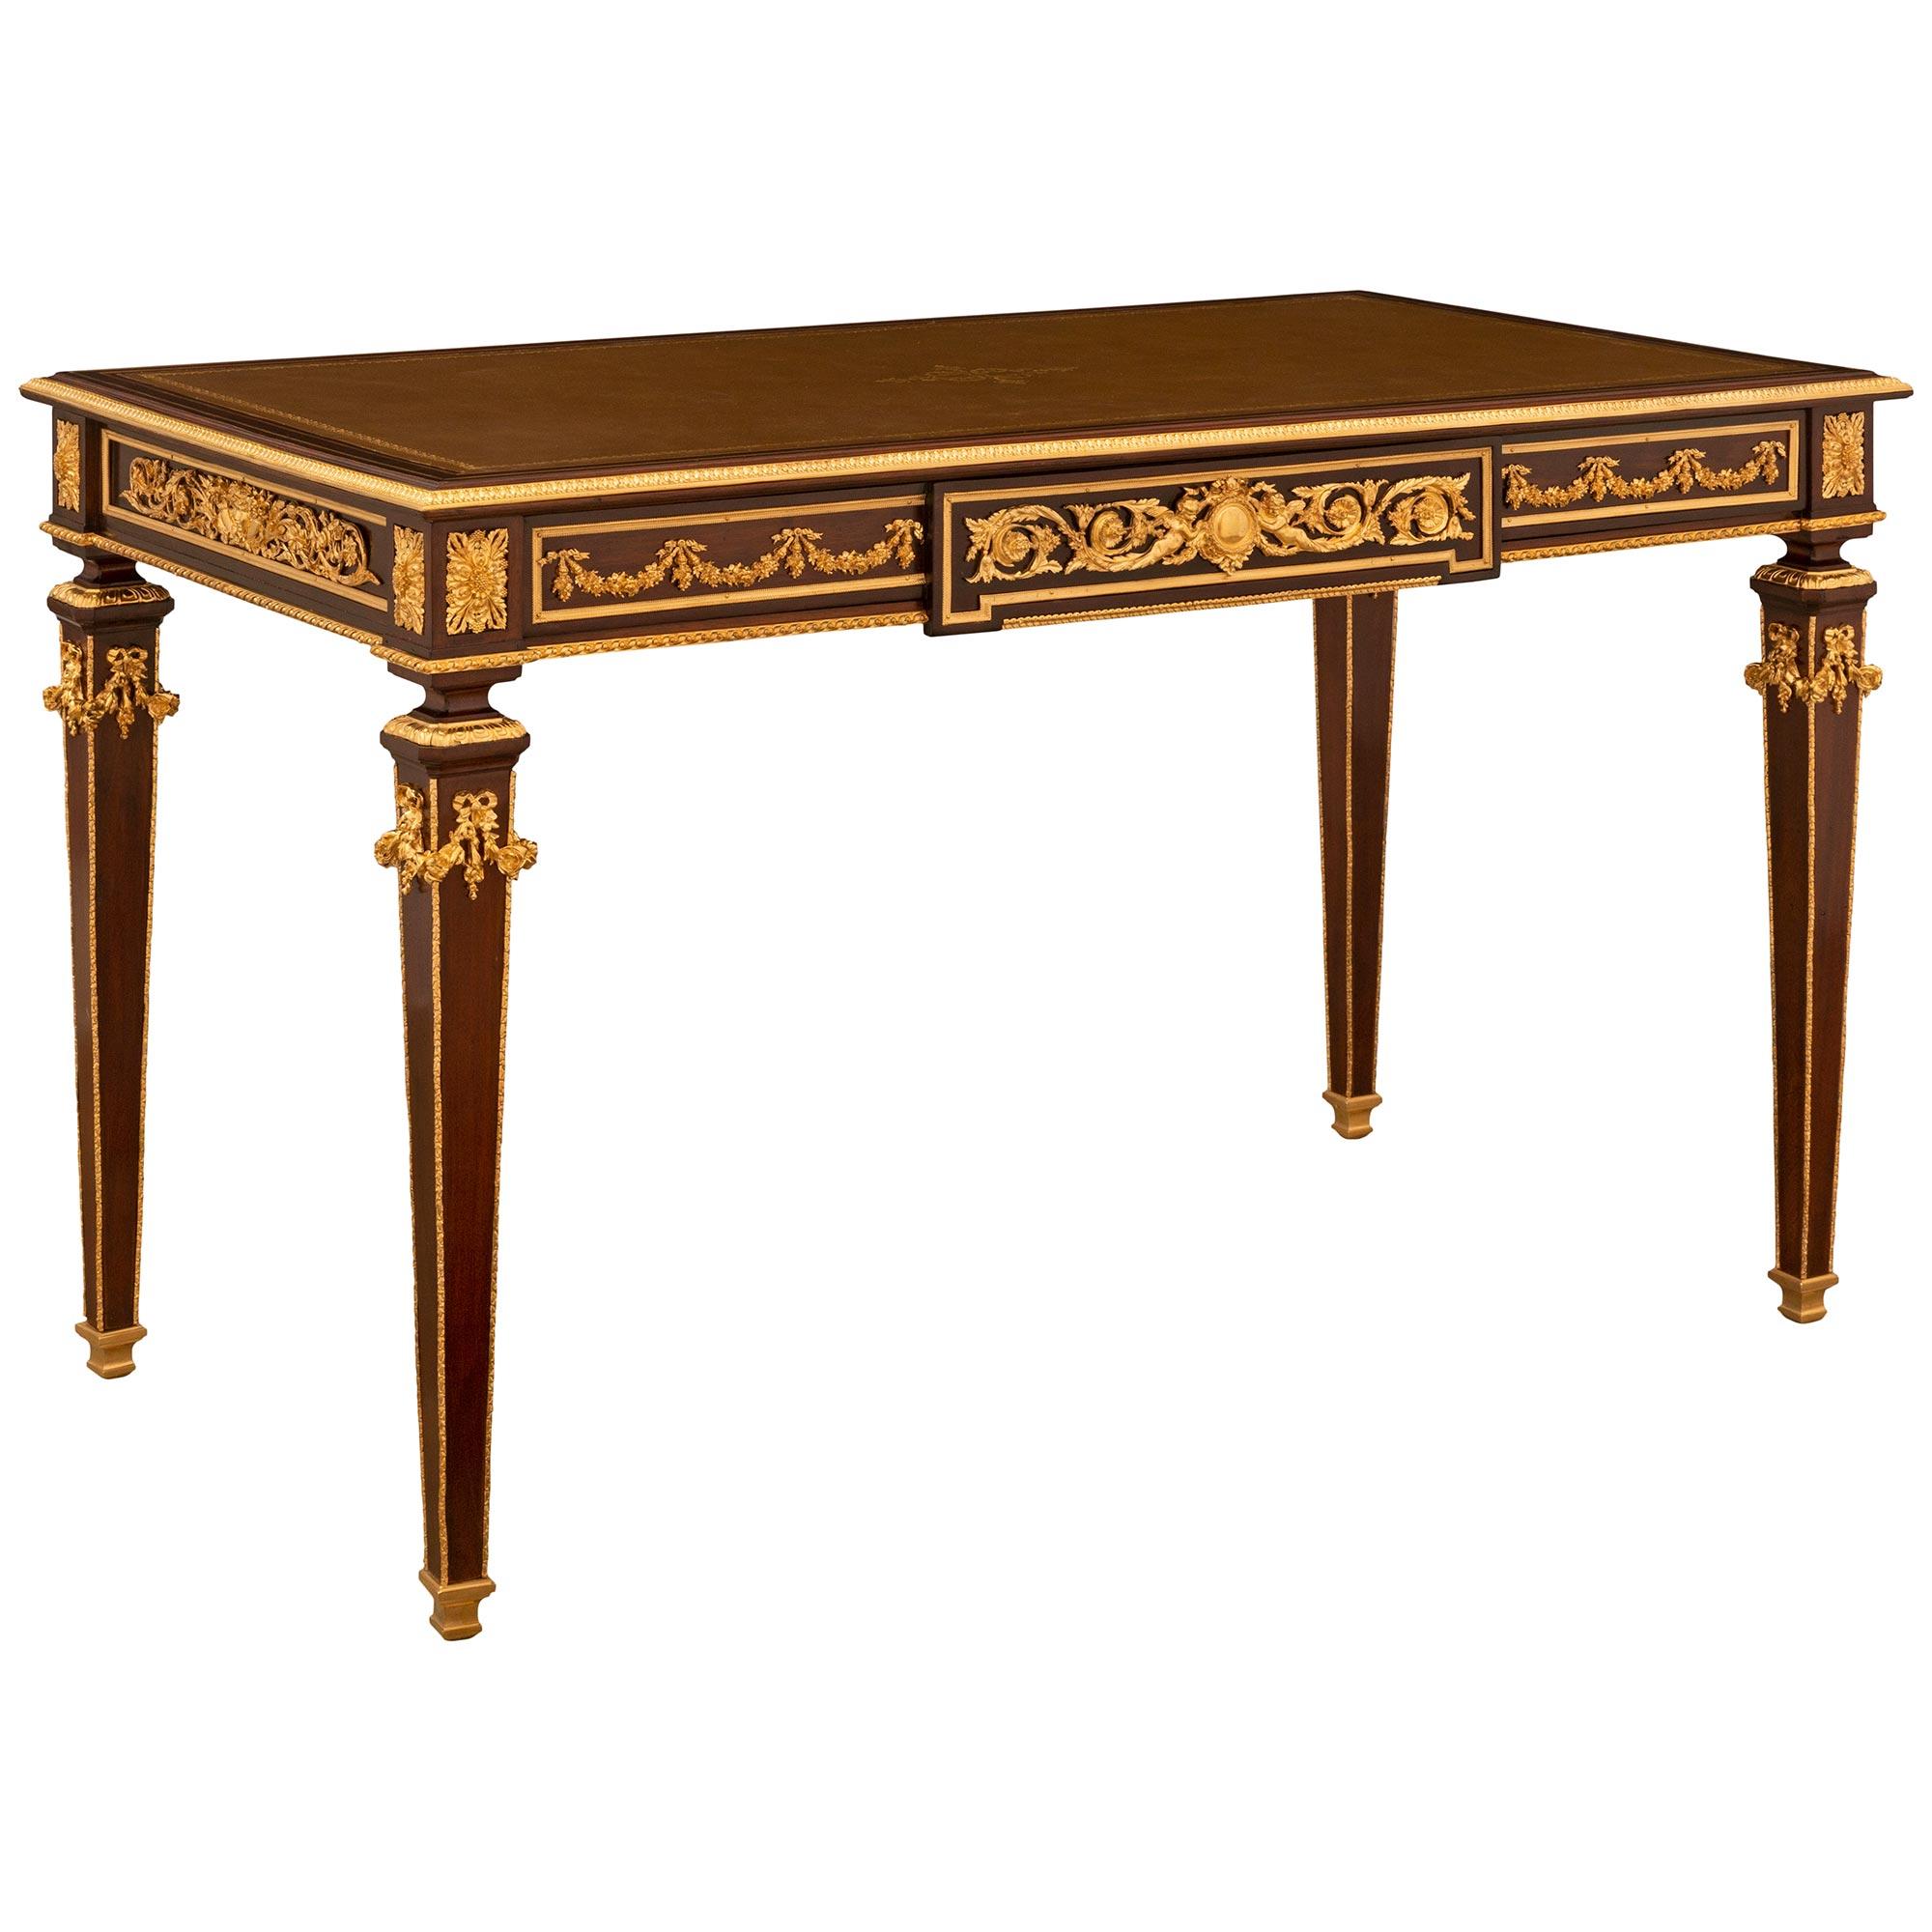 Louis XVI French 19th Century Belle Époque Period Mahogany, Brass and Ormolu Desk For Sale